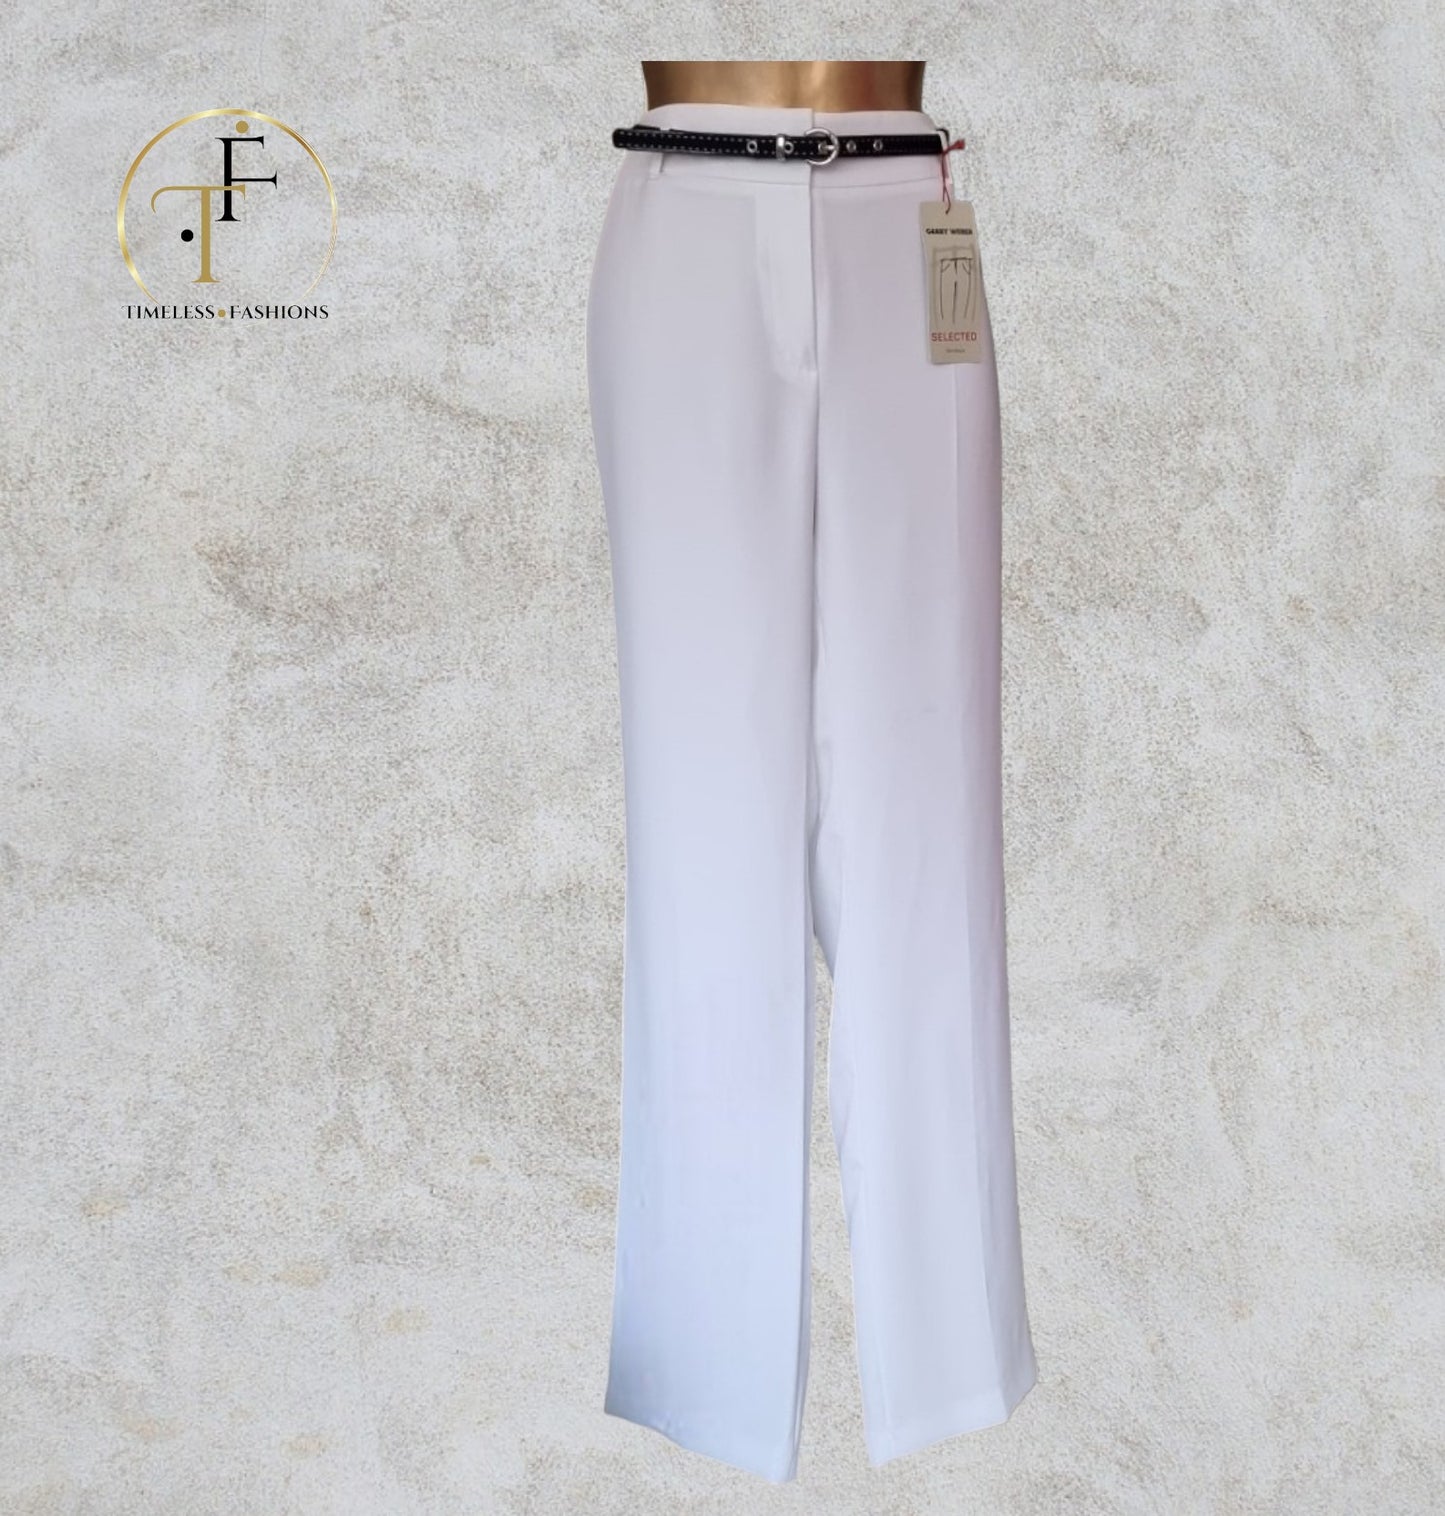 Gerry Weber Women’s White Lined Slim Style Summer Trousers UK14 US 10 EU 42 IT 45 Timeless Fashions